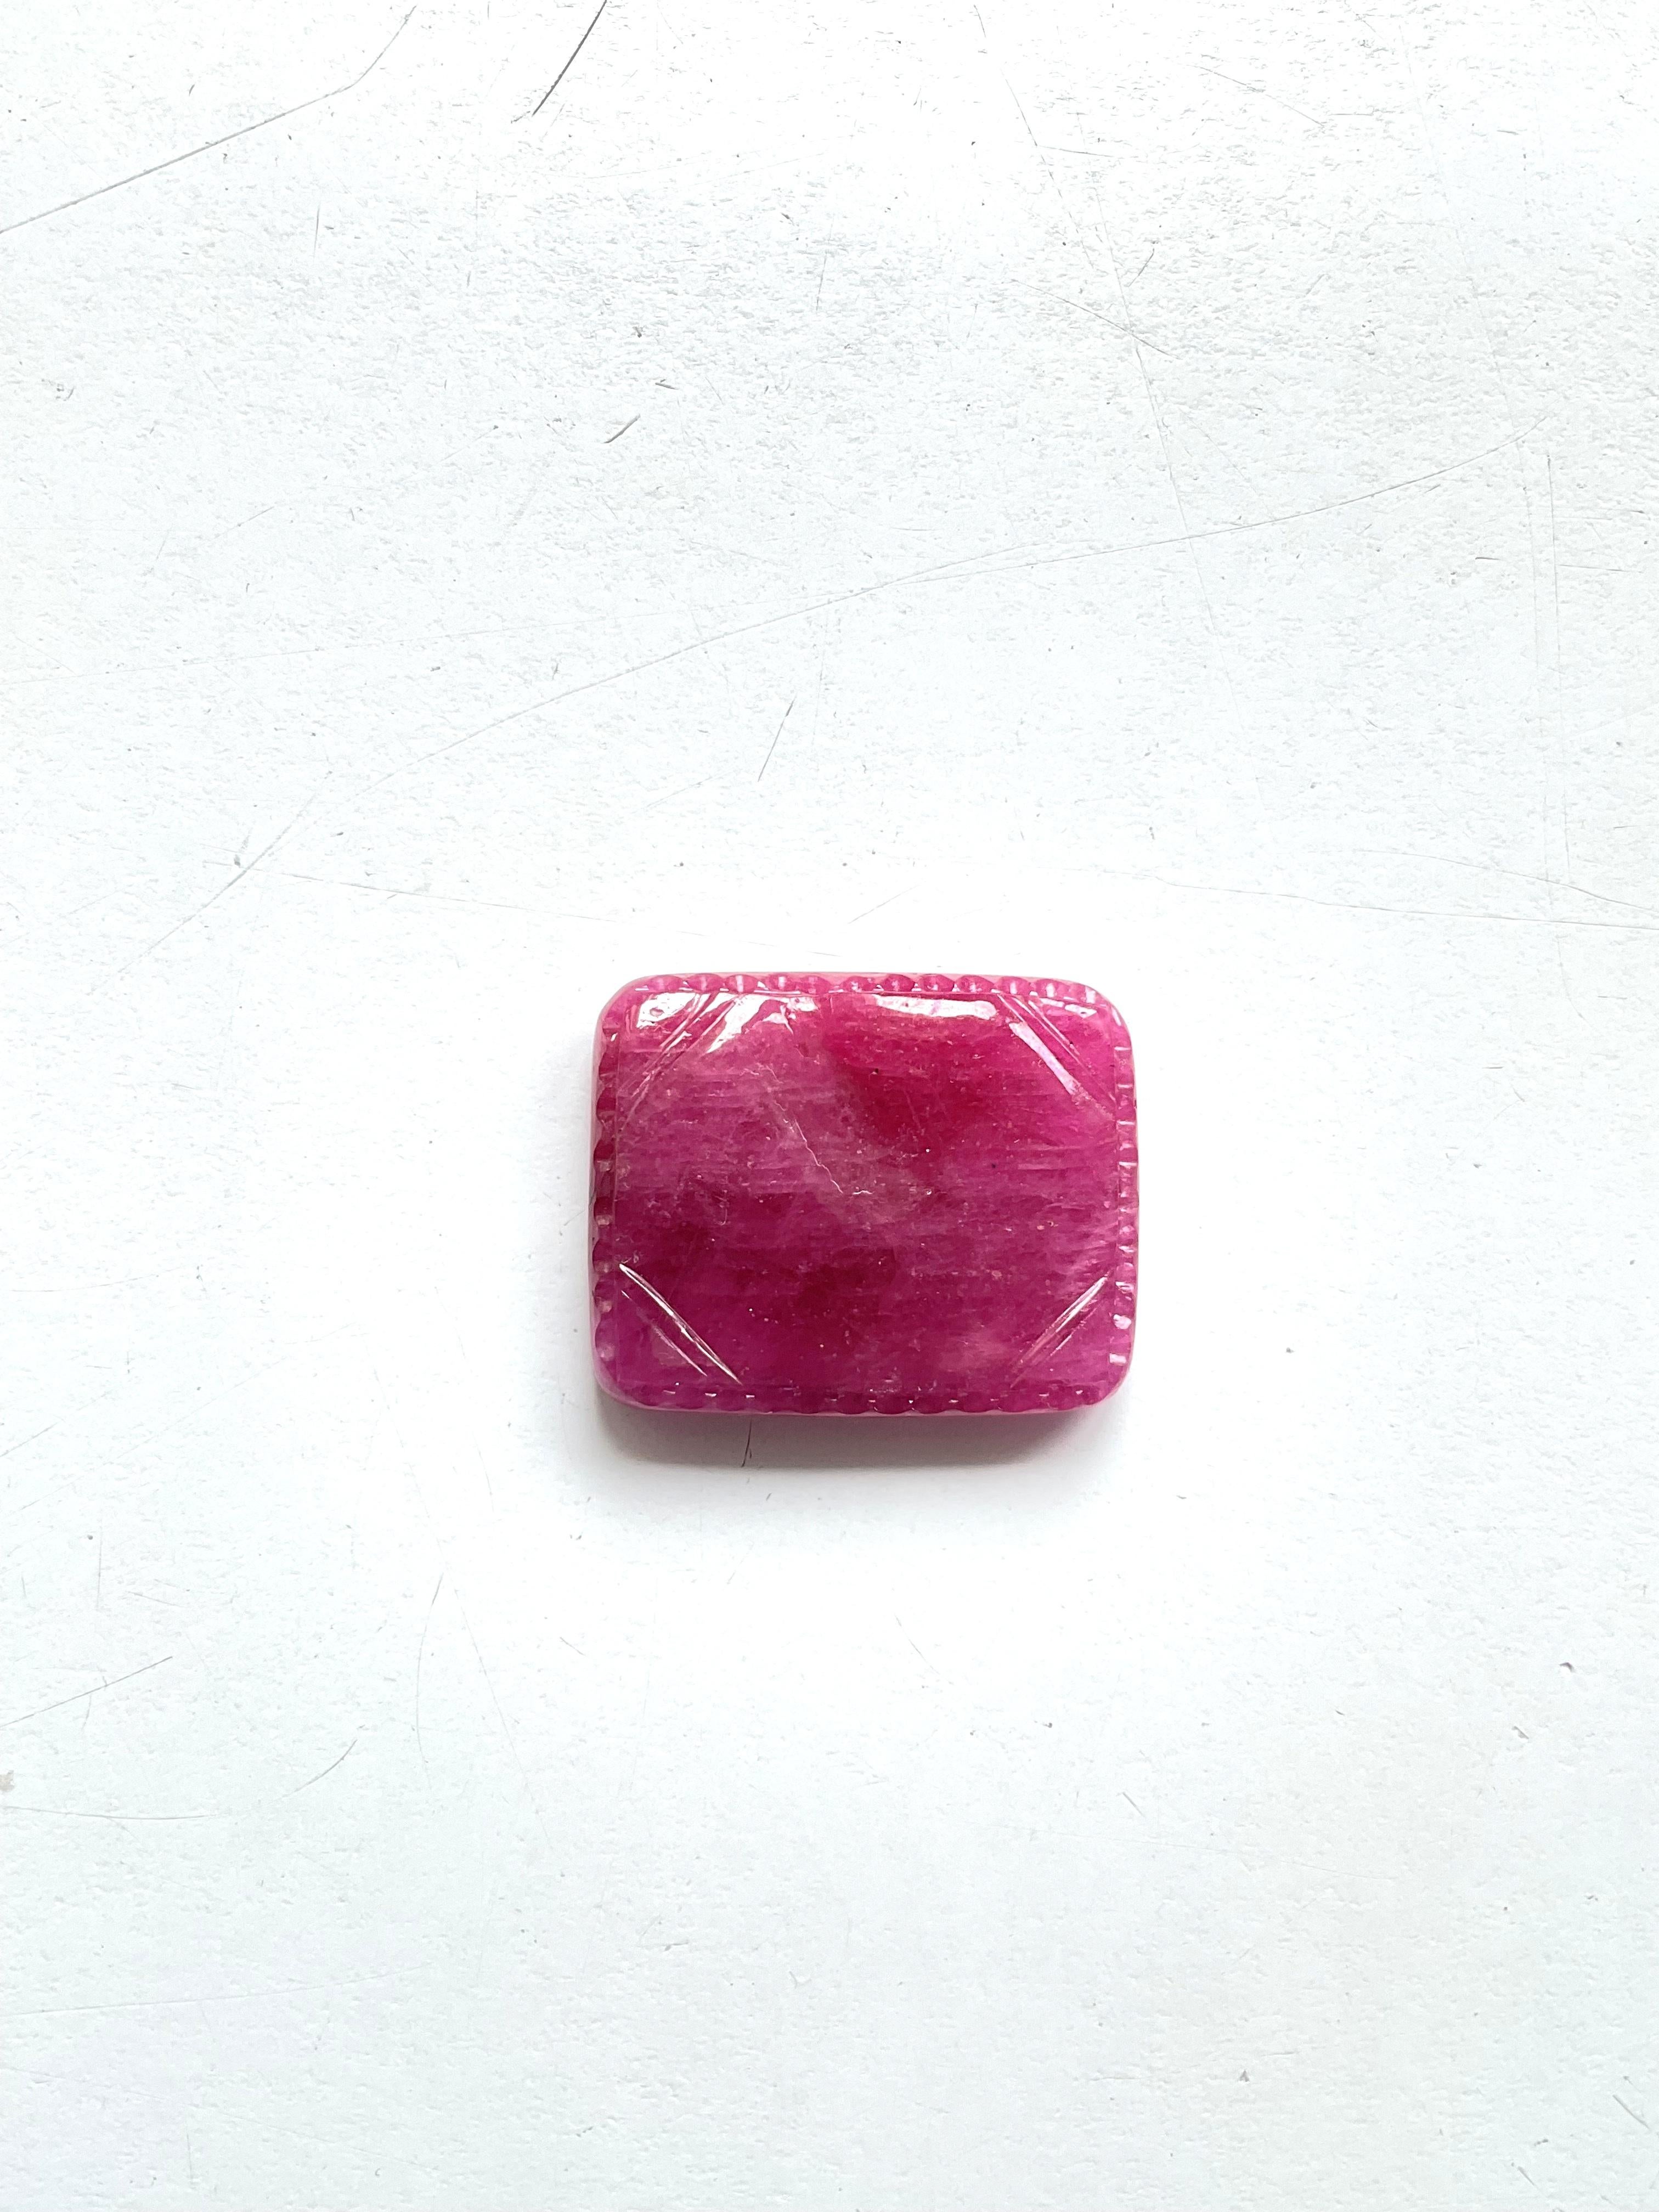 Square Cut Certified 89.35 Carats Ruby Mozambique Carved Specimen Heated Natural Gemstone For Sale